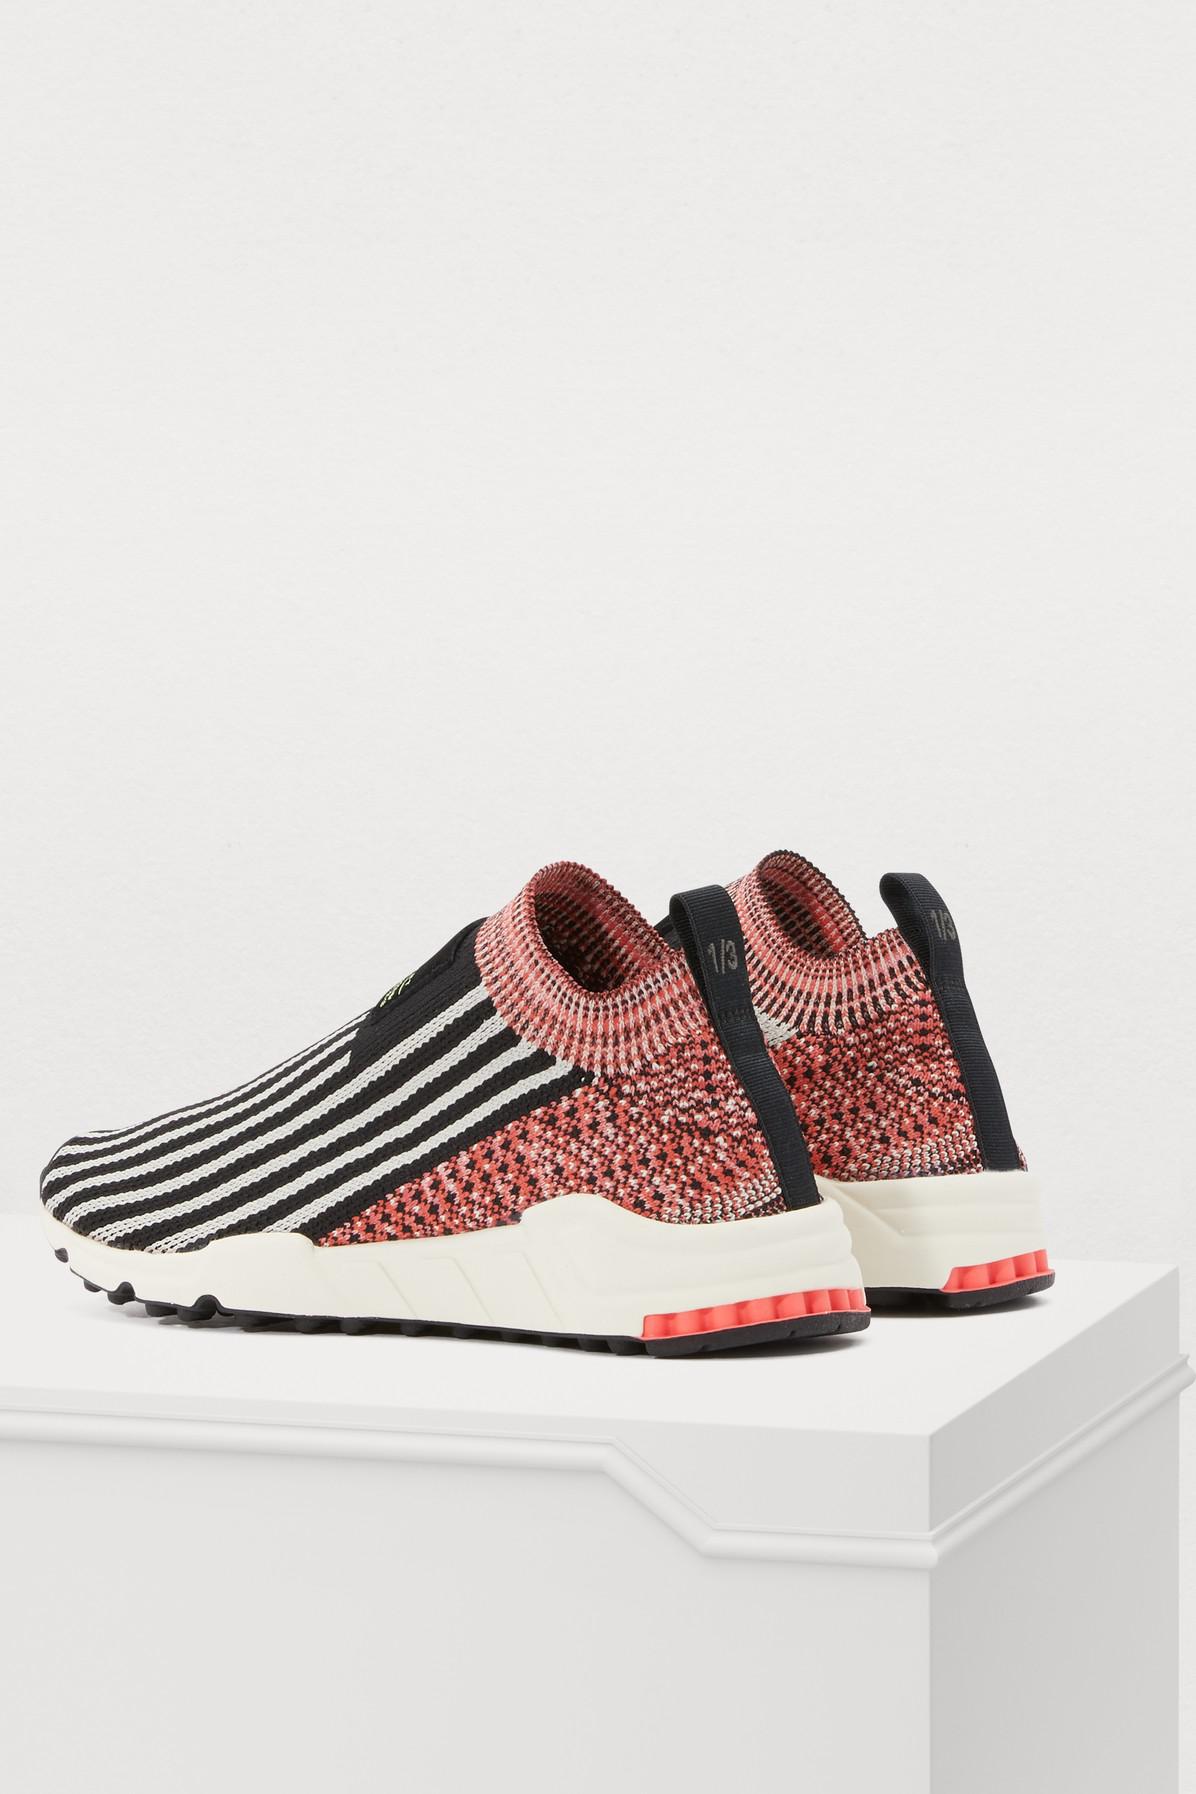 adidas Equity Support Sk Primeknit 